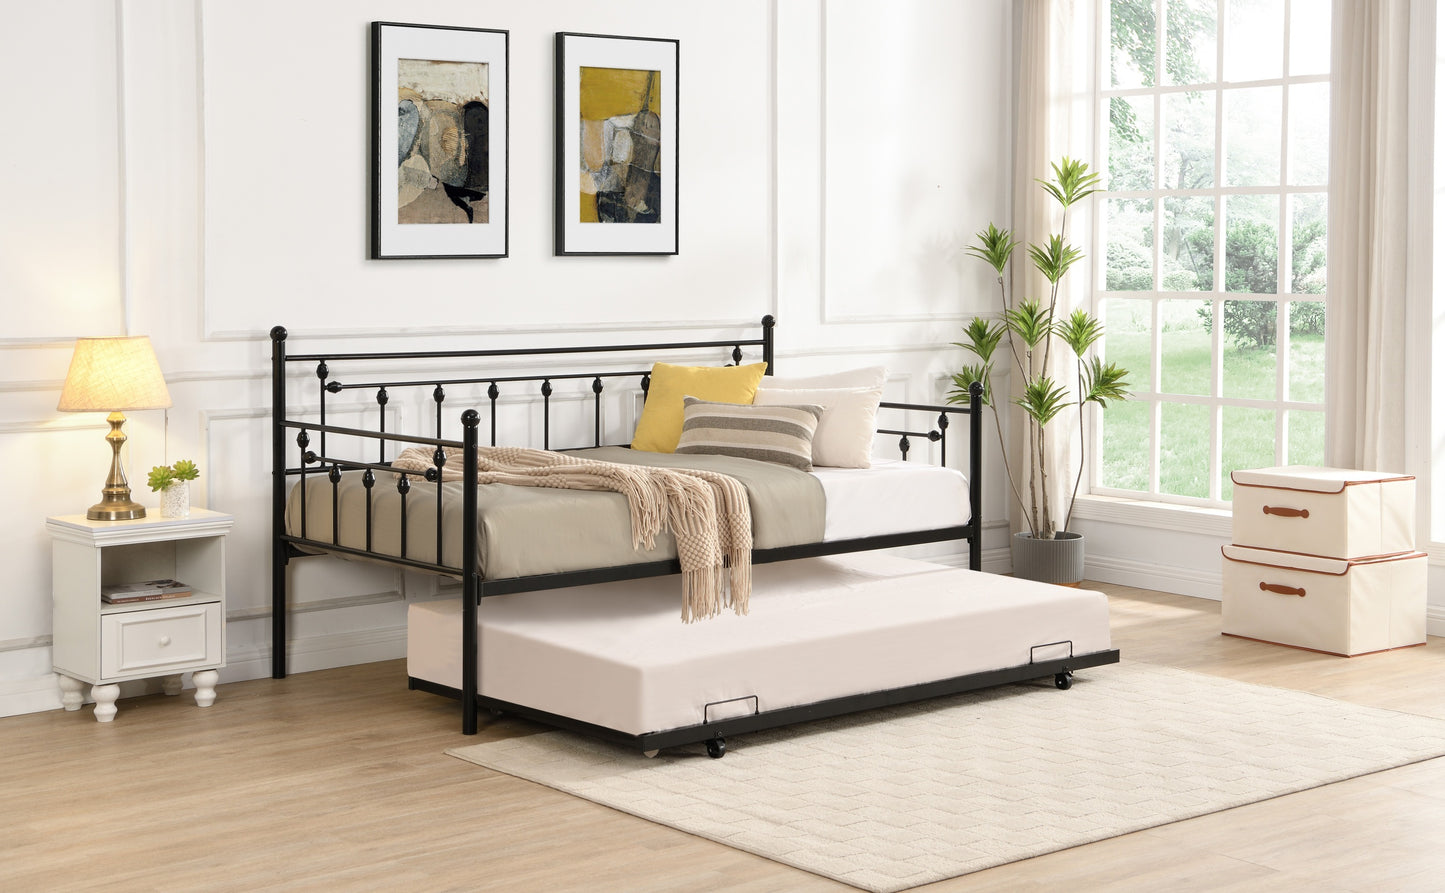 Twin Size Metal Daybed with Pull Out Trundle, Modern 2 in 1 Sofa Bed Frame for Kids Teens Adults,Single Daybed Sofa Bed Frame for Bedroom Living Room Guest Room,No Box Spring Needed